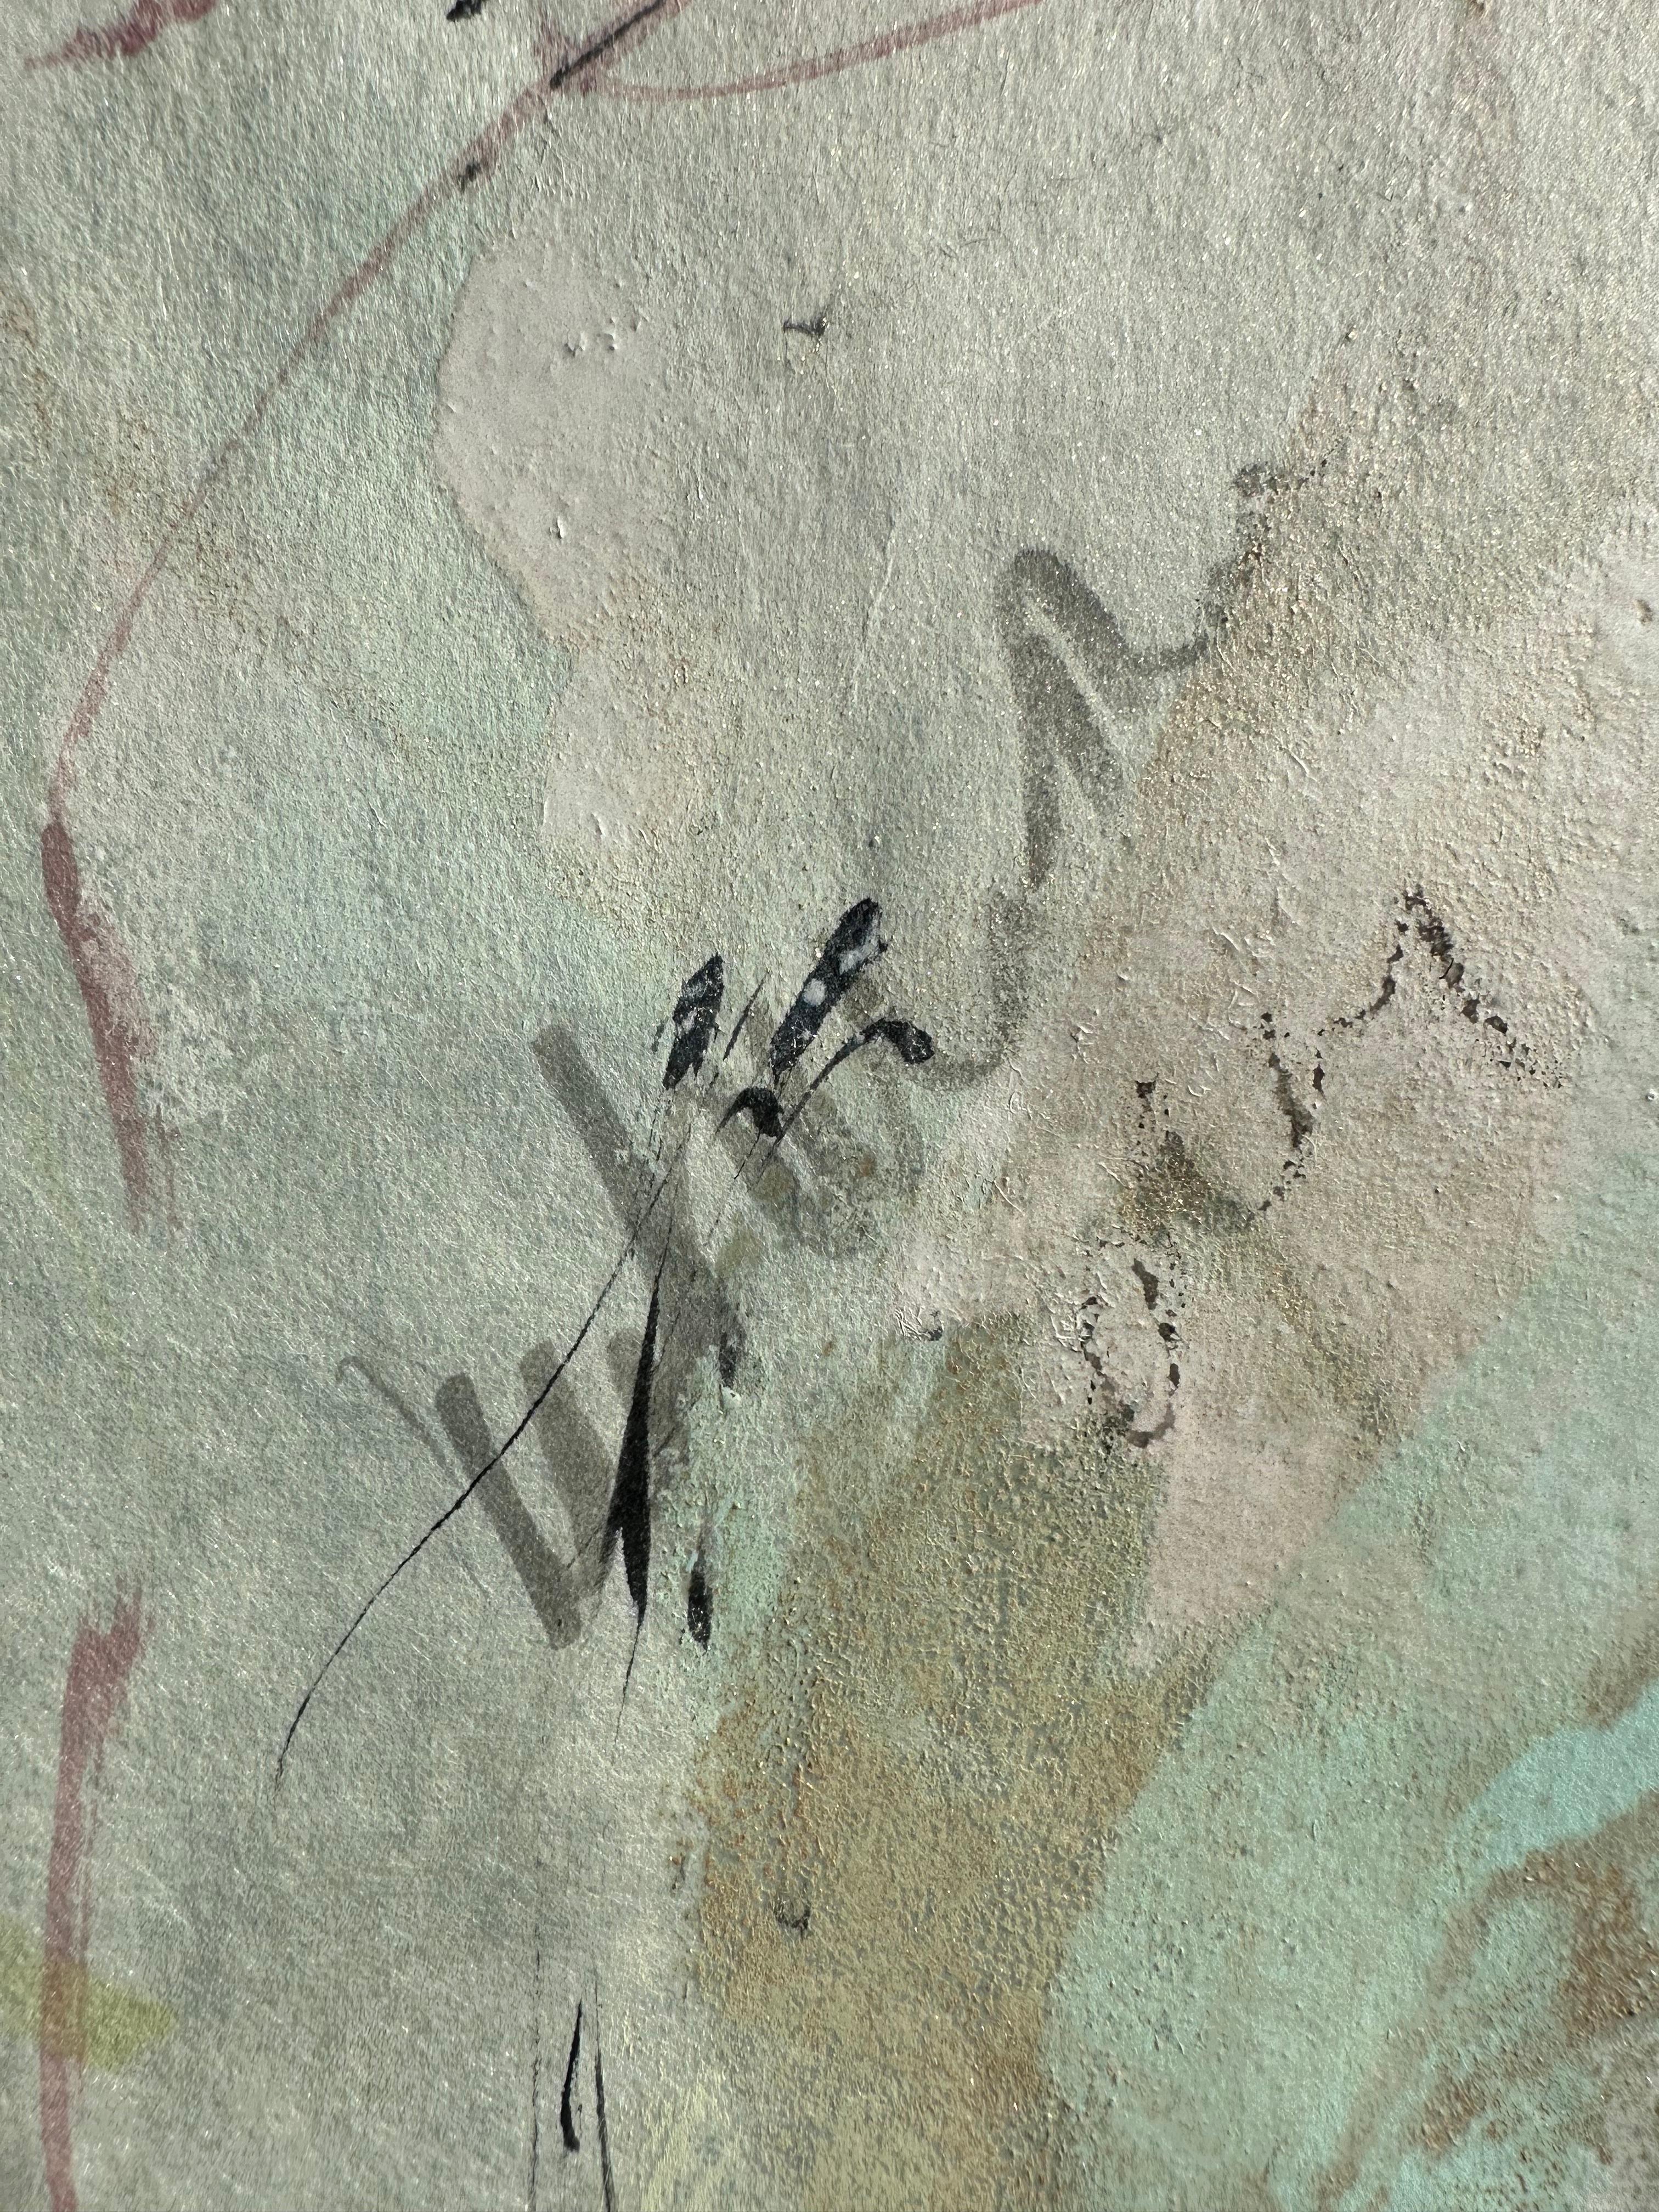 In But Now A Dreamlike Memory color, line, shape, and texture collide with handwritten romantic fragments of prose on Kozuke ivory paper. This one-of-a-kind, unmounted encaustic monotype illuminates a poetic interior landscape. The softness of the